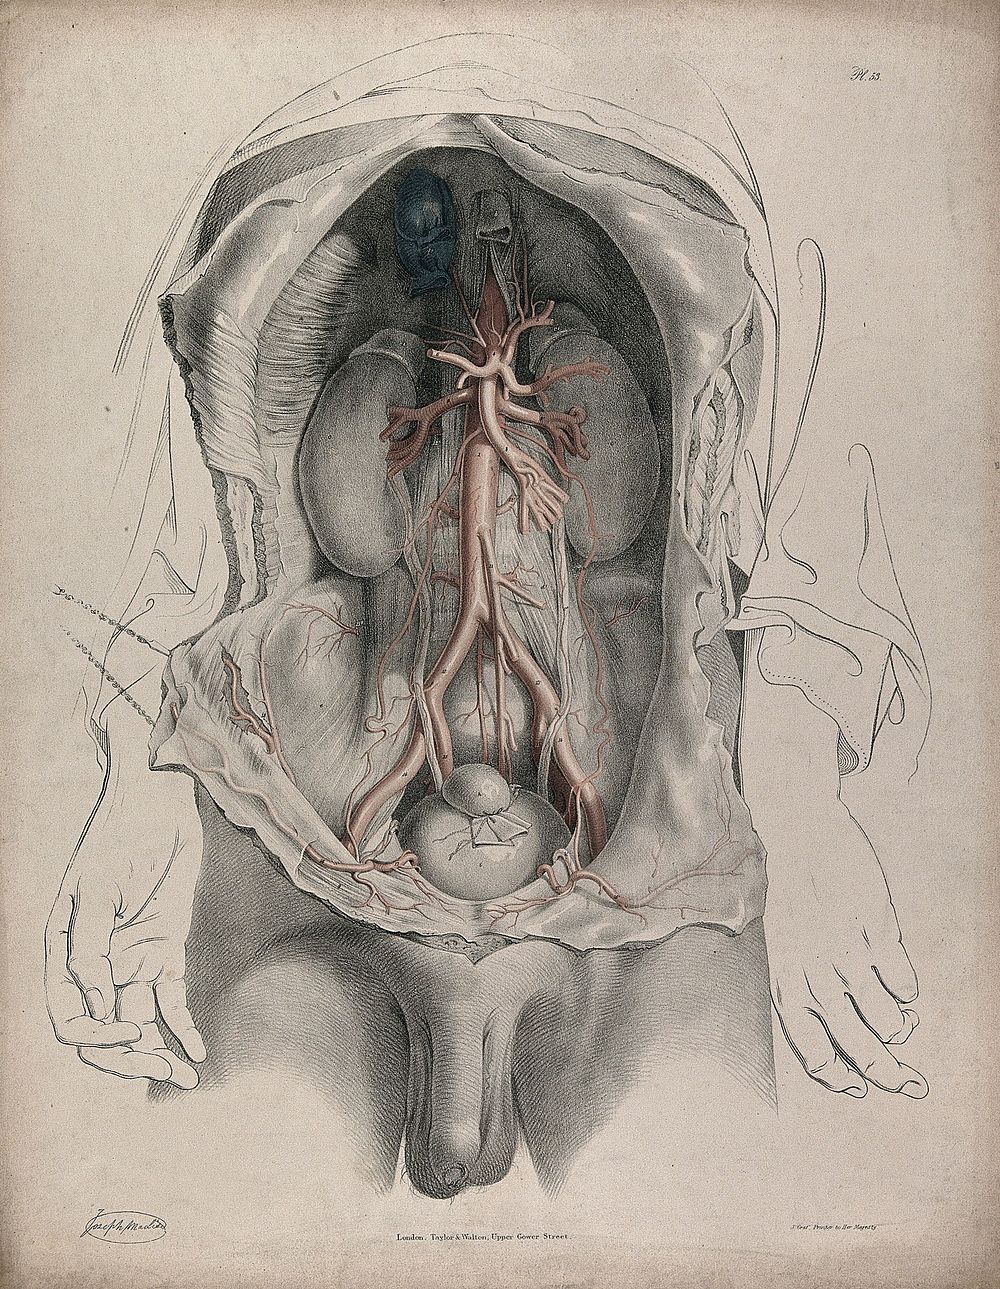 The circulatory system: dissection of the torso showing the kidneys and bladder, with the arteries and veins indicated in…